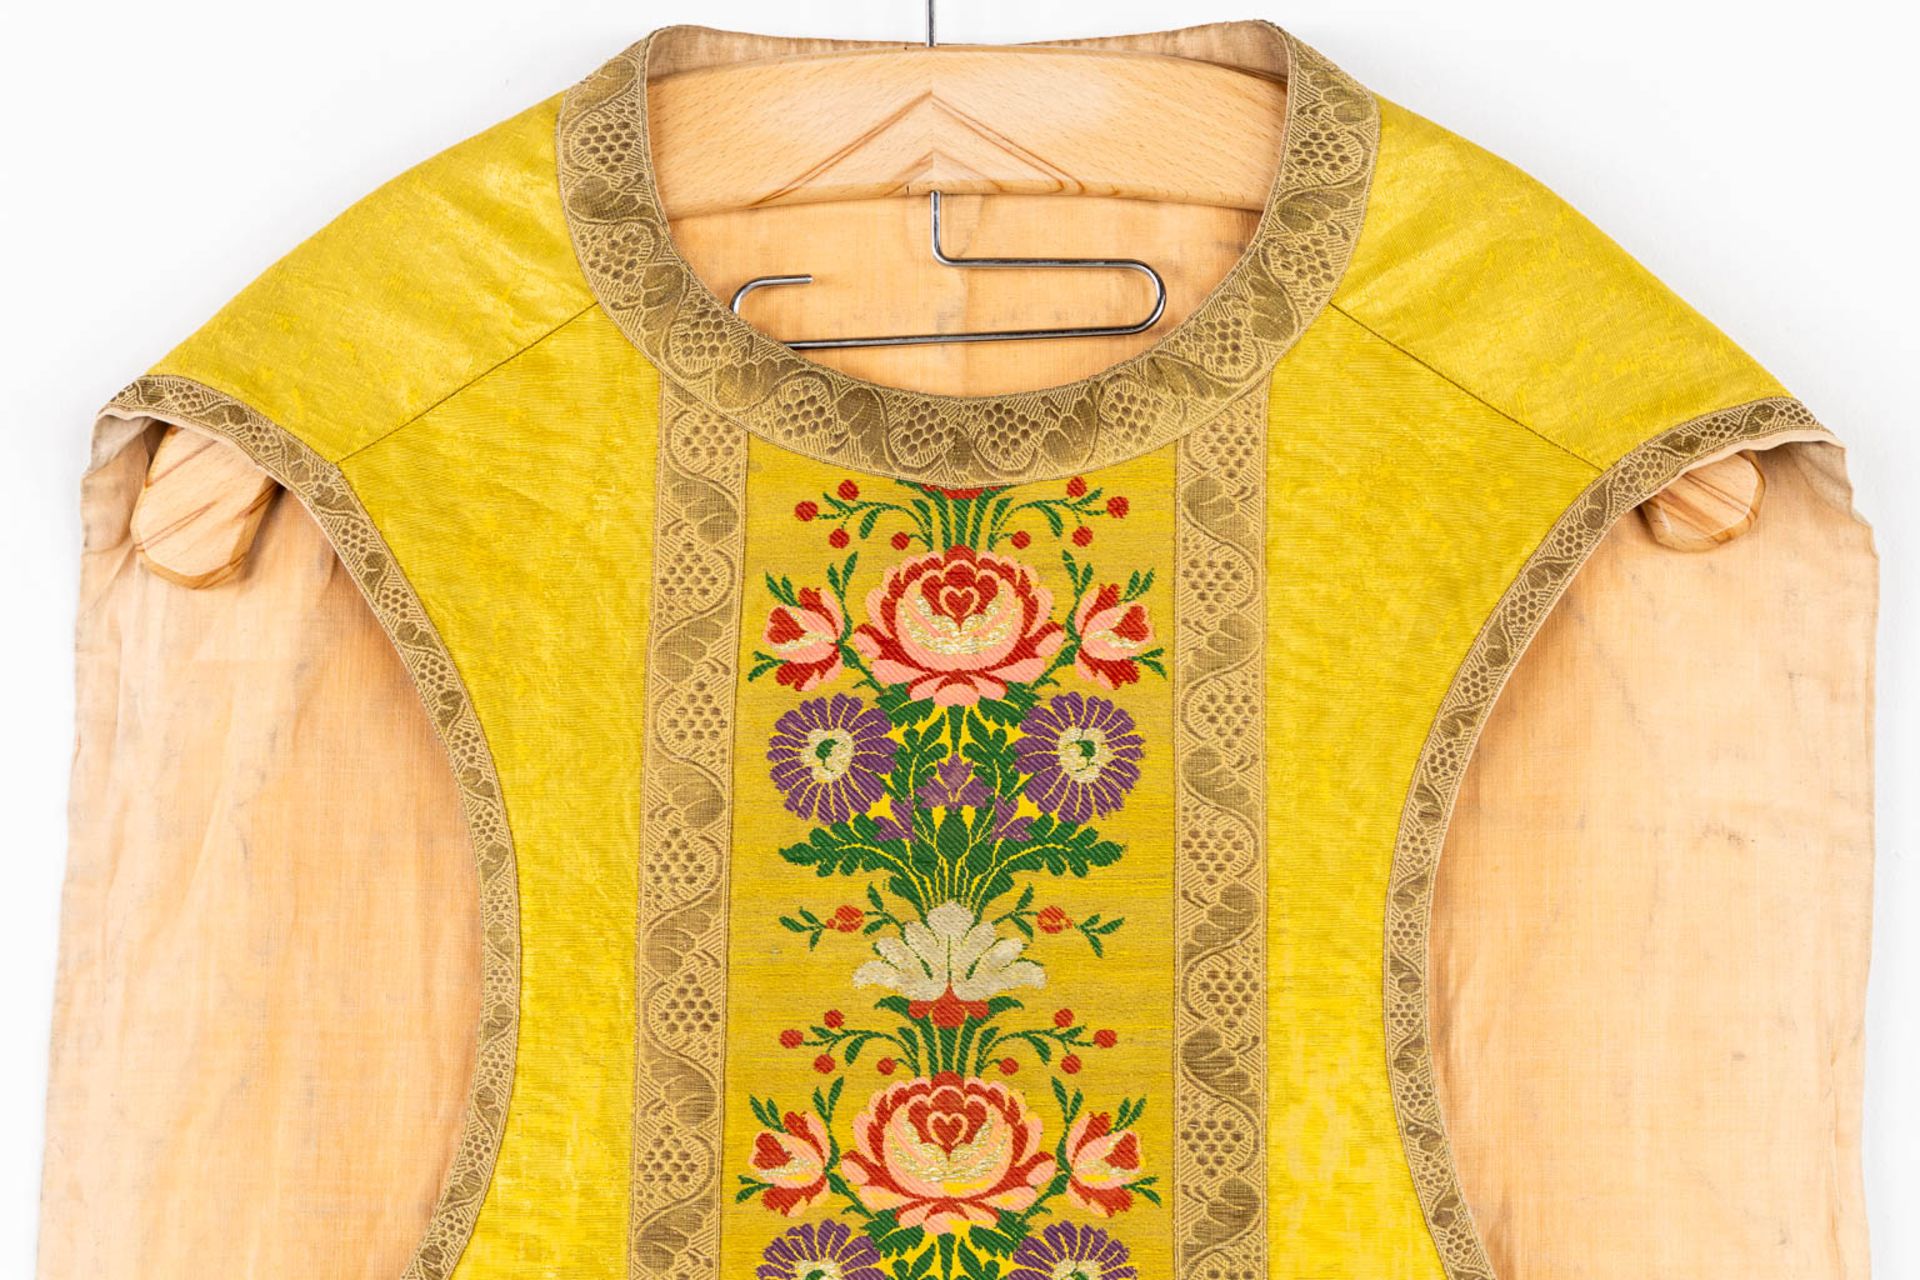 A Humeral Veil and Four Roman Chasubles, embroideries with an IHS and floral decor. - Image 11 of 29